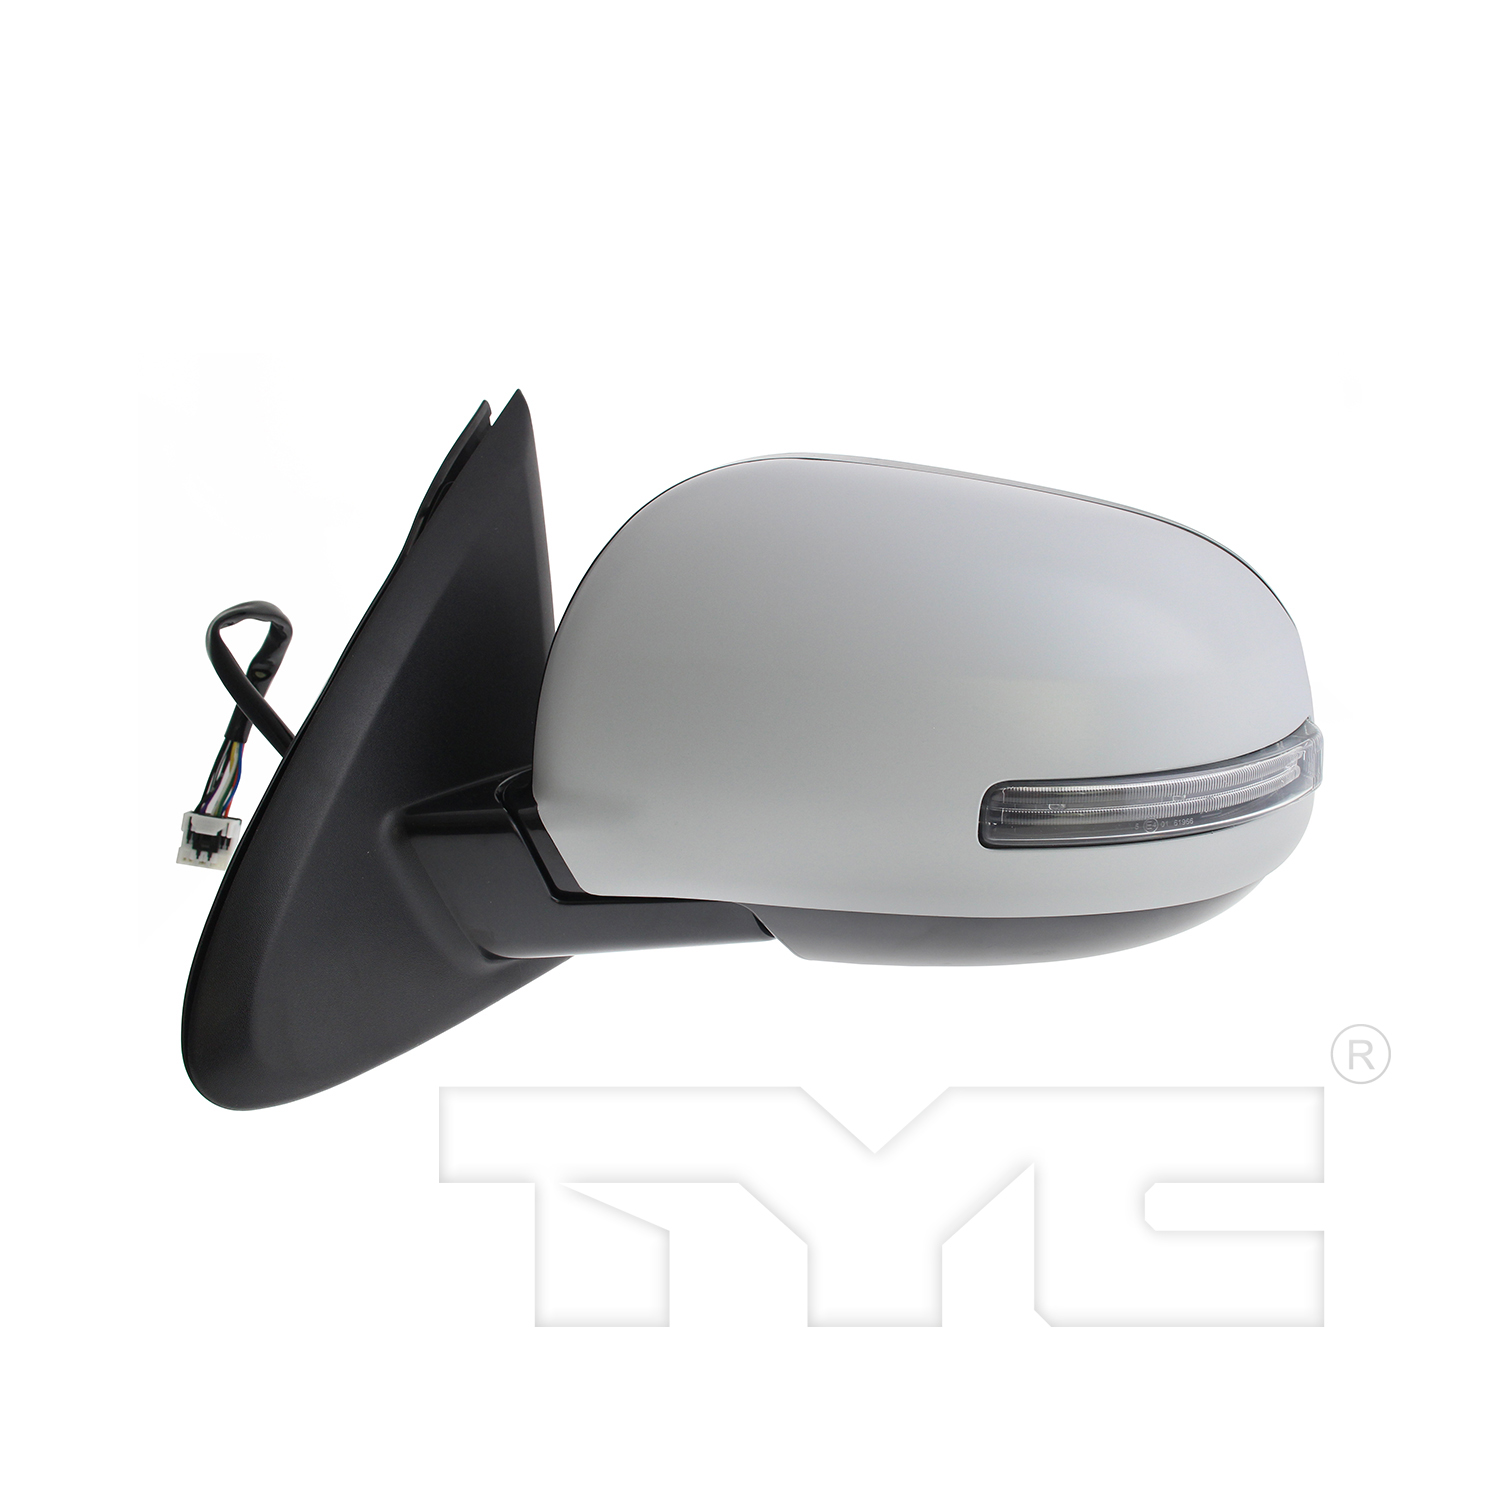 Aftermarket MIRRORS for MITSUBISHI - OUTLANDER, OUTLANDER,16-17,LT Mirror outside rear view